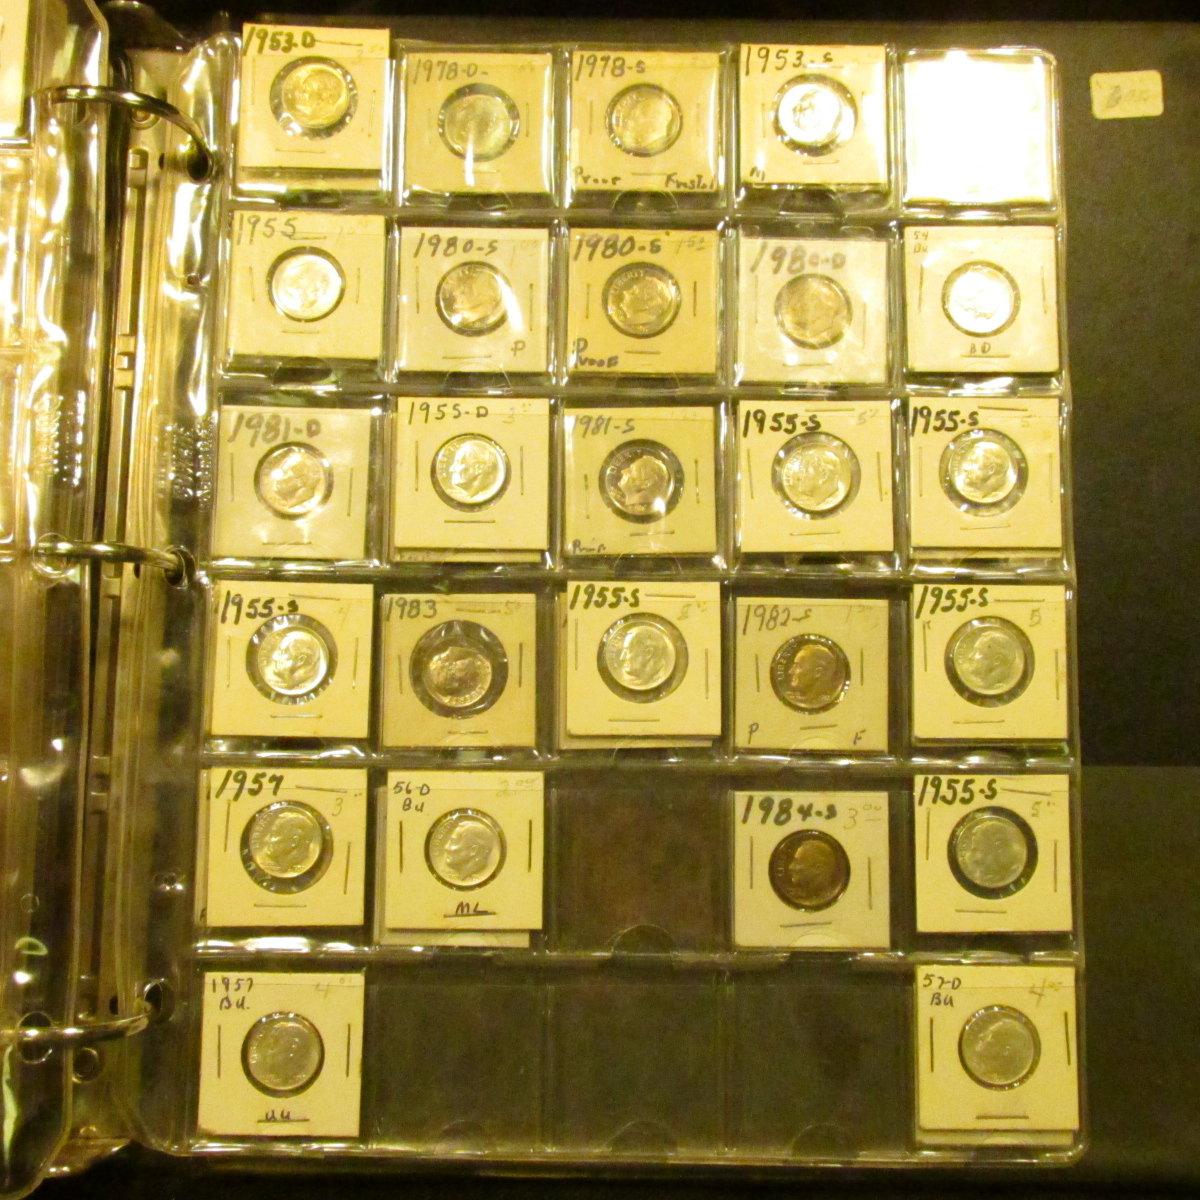 Three-Ring Binder full of Mercury and Roosevelt Dimes with some spectacular BU and Proof Coins. Incl